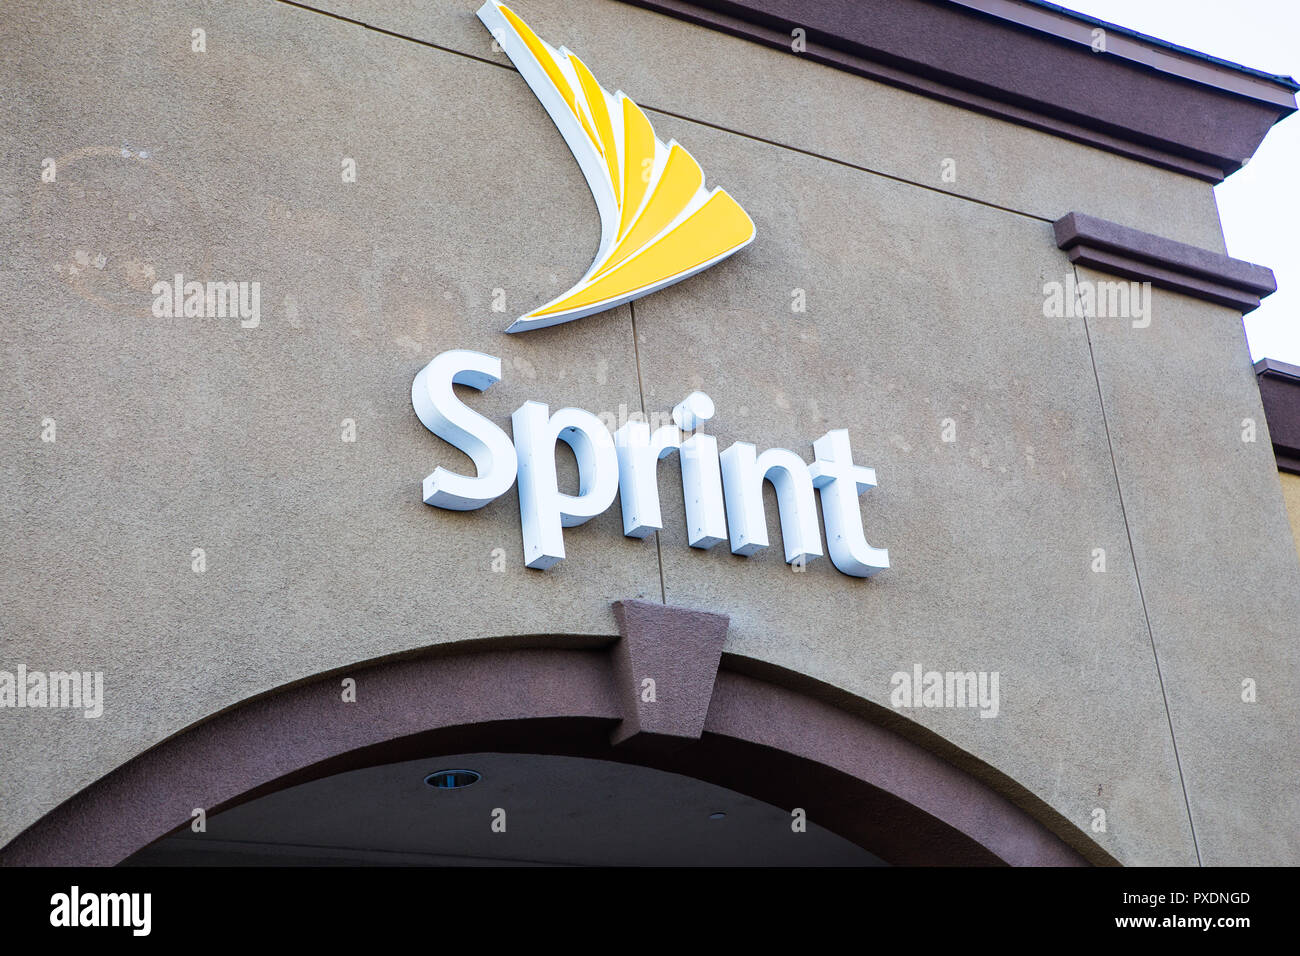 American telecommunications company Sprint store building exterior sign and logo Stock Photo